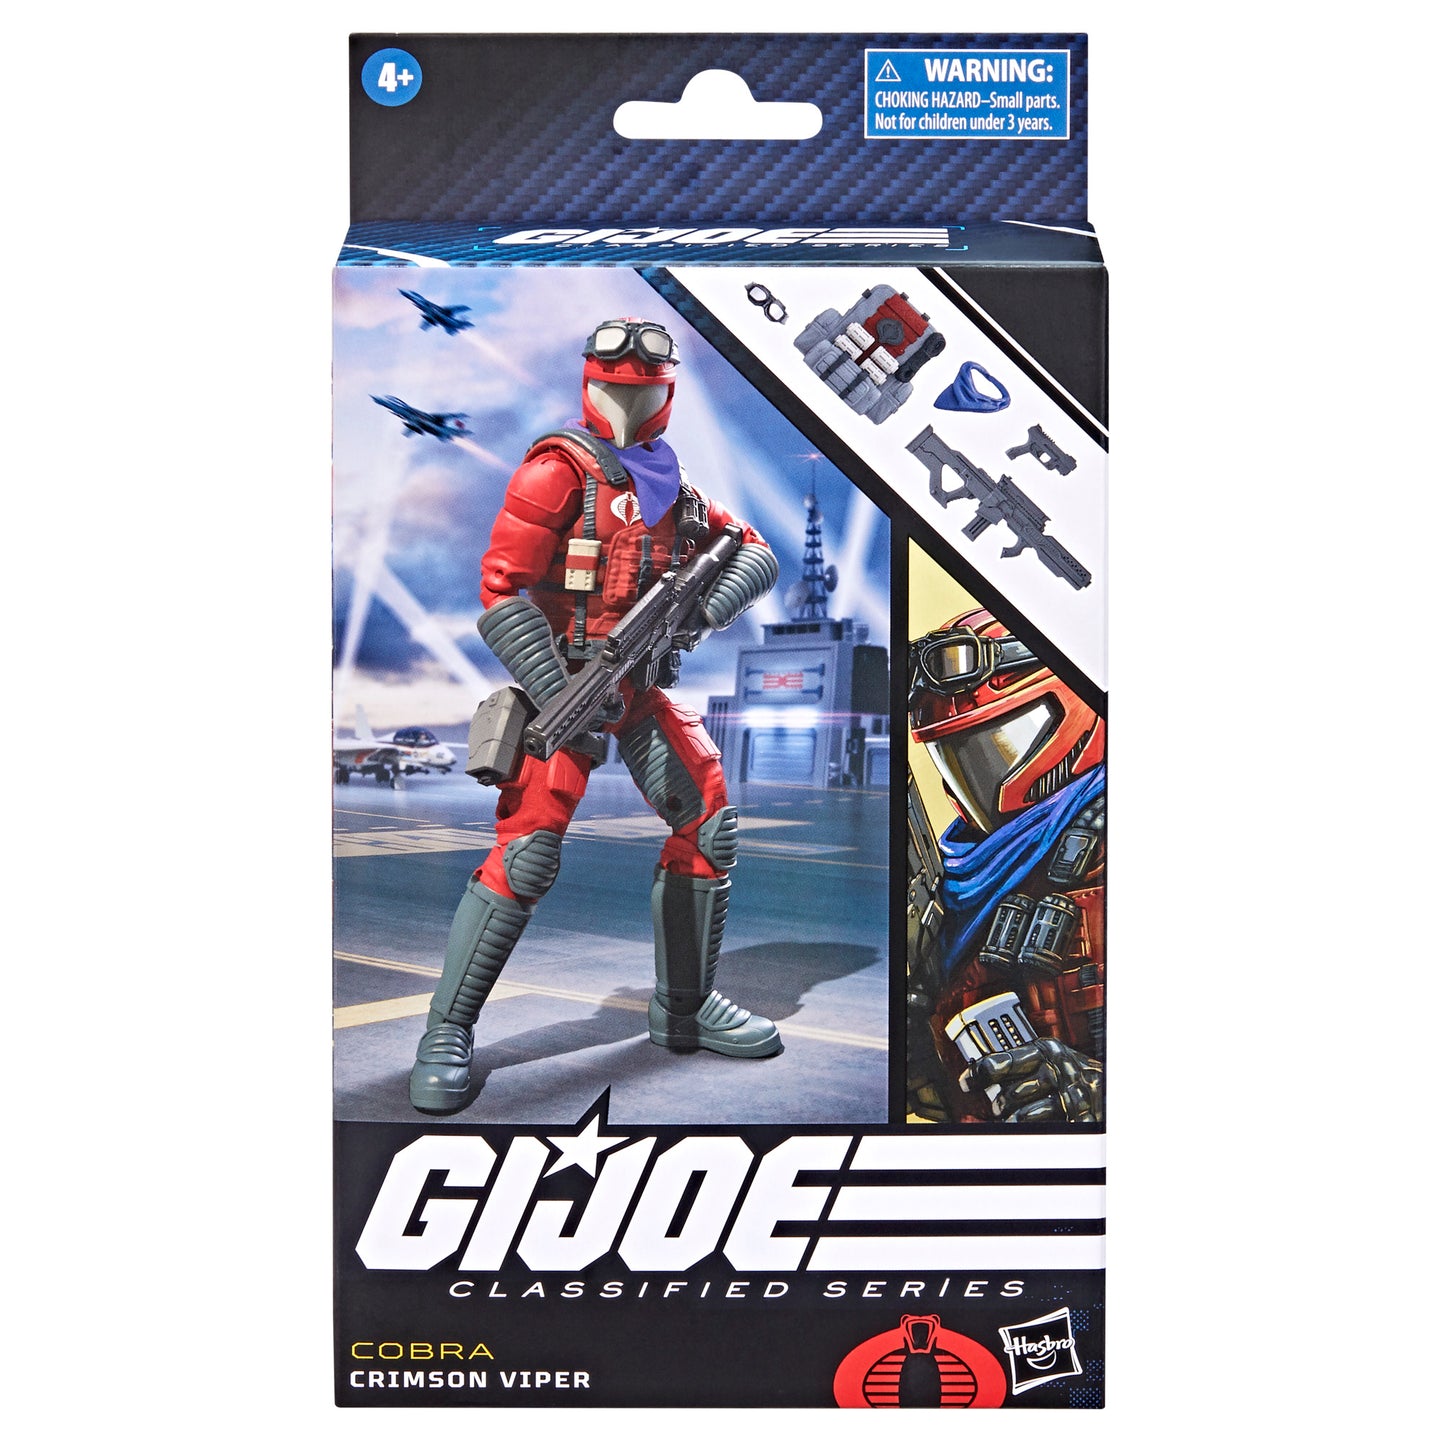 G.I. Joe Classified Series in a box front view - Heretoserveyou